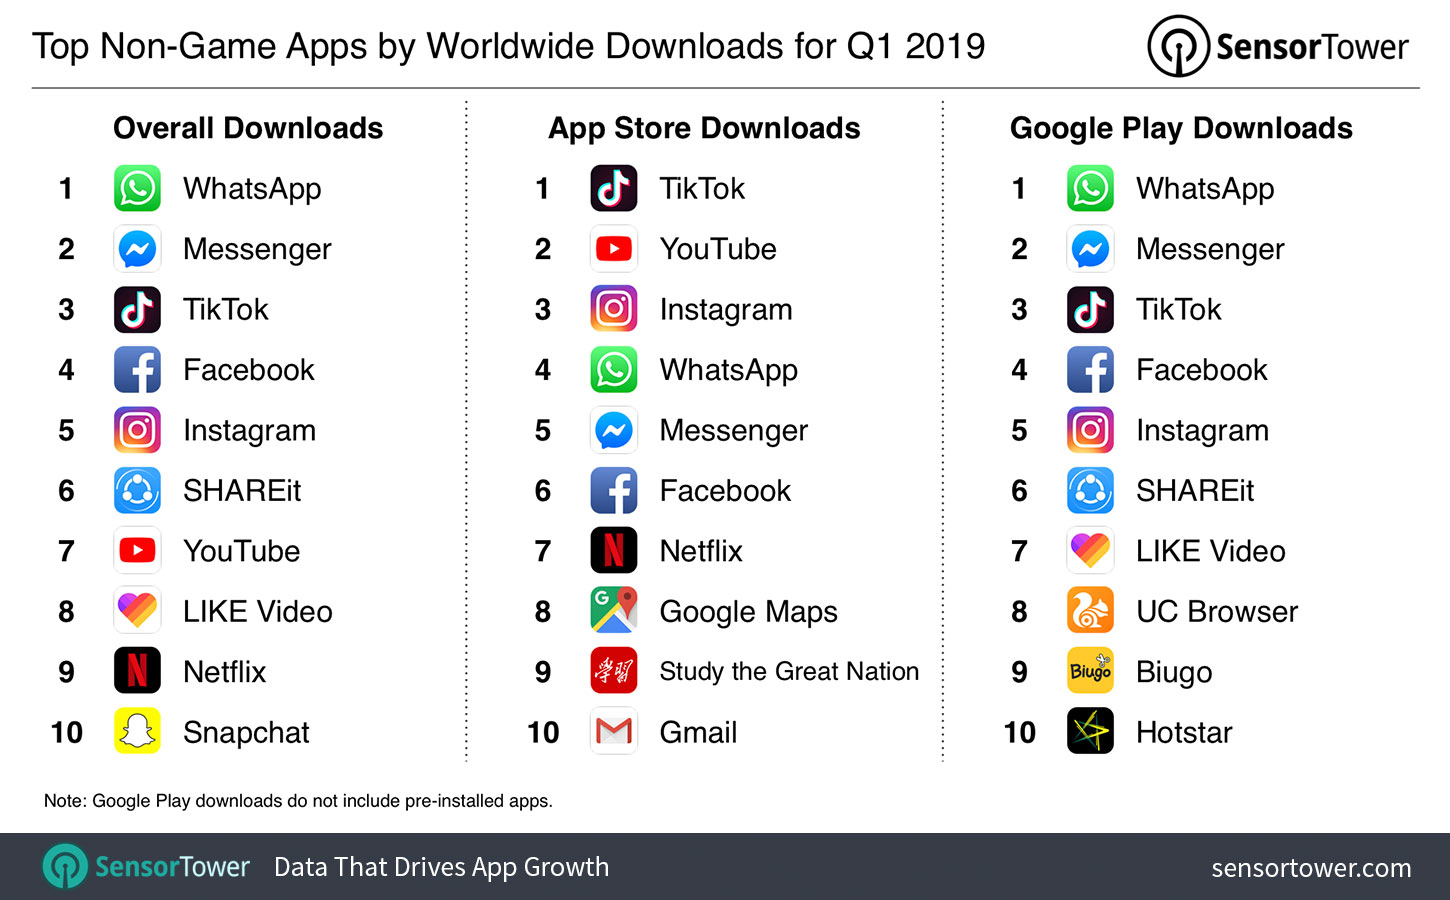 Chart showing the world's most downloaded iOS and Google Play apps for Q1 2019